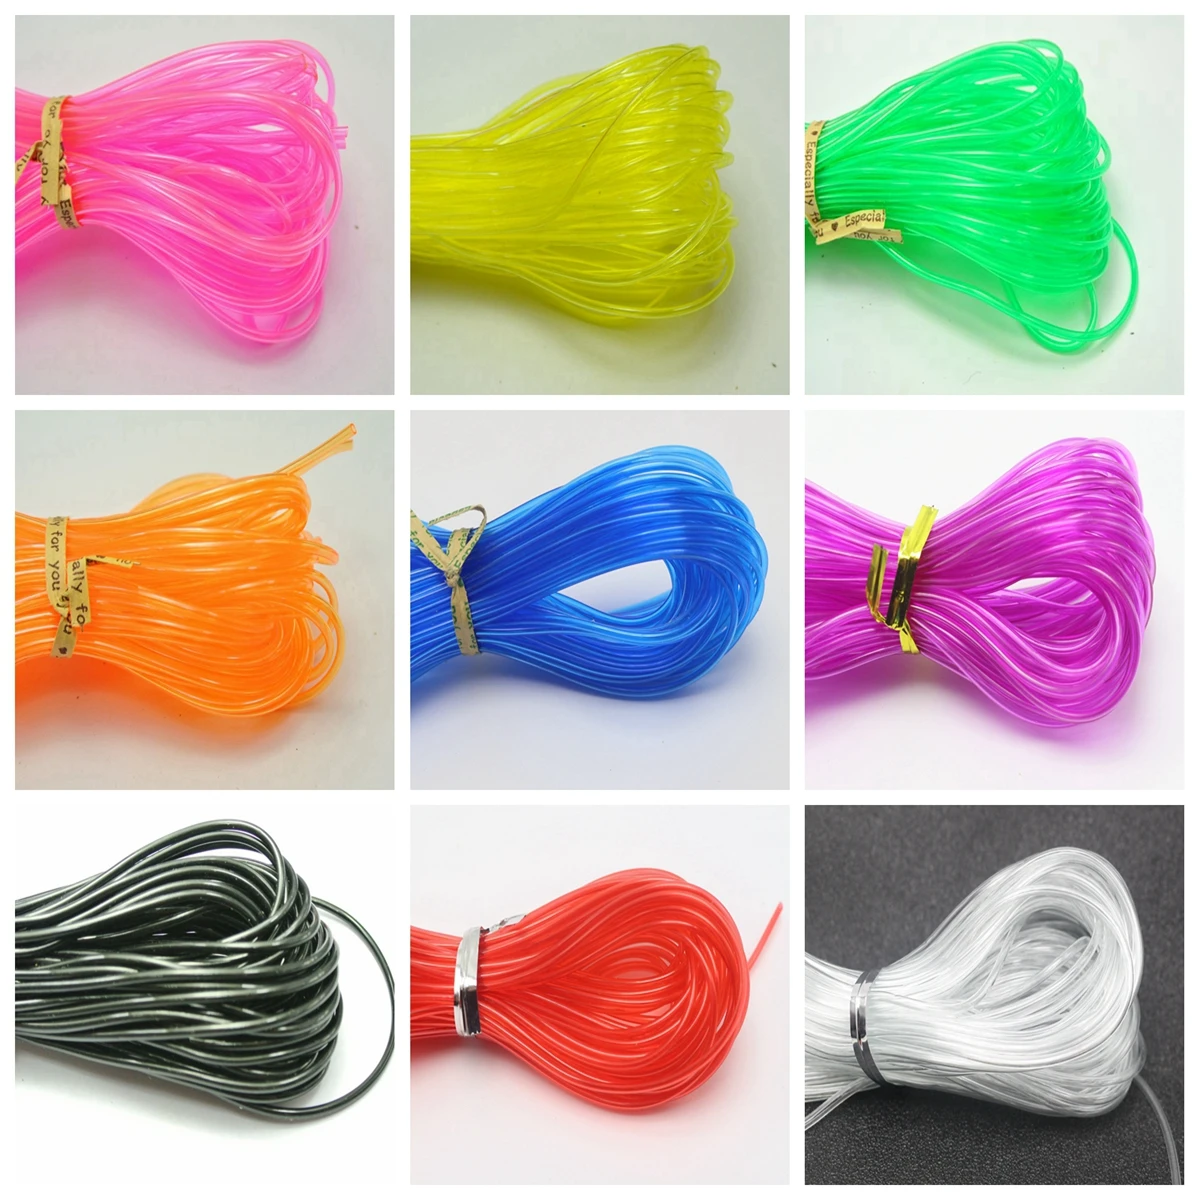 

10 Meter Transparent 2mm Hollow Rubber Tubing Jewelry Cord Cover Memory Wire